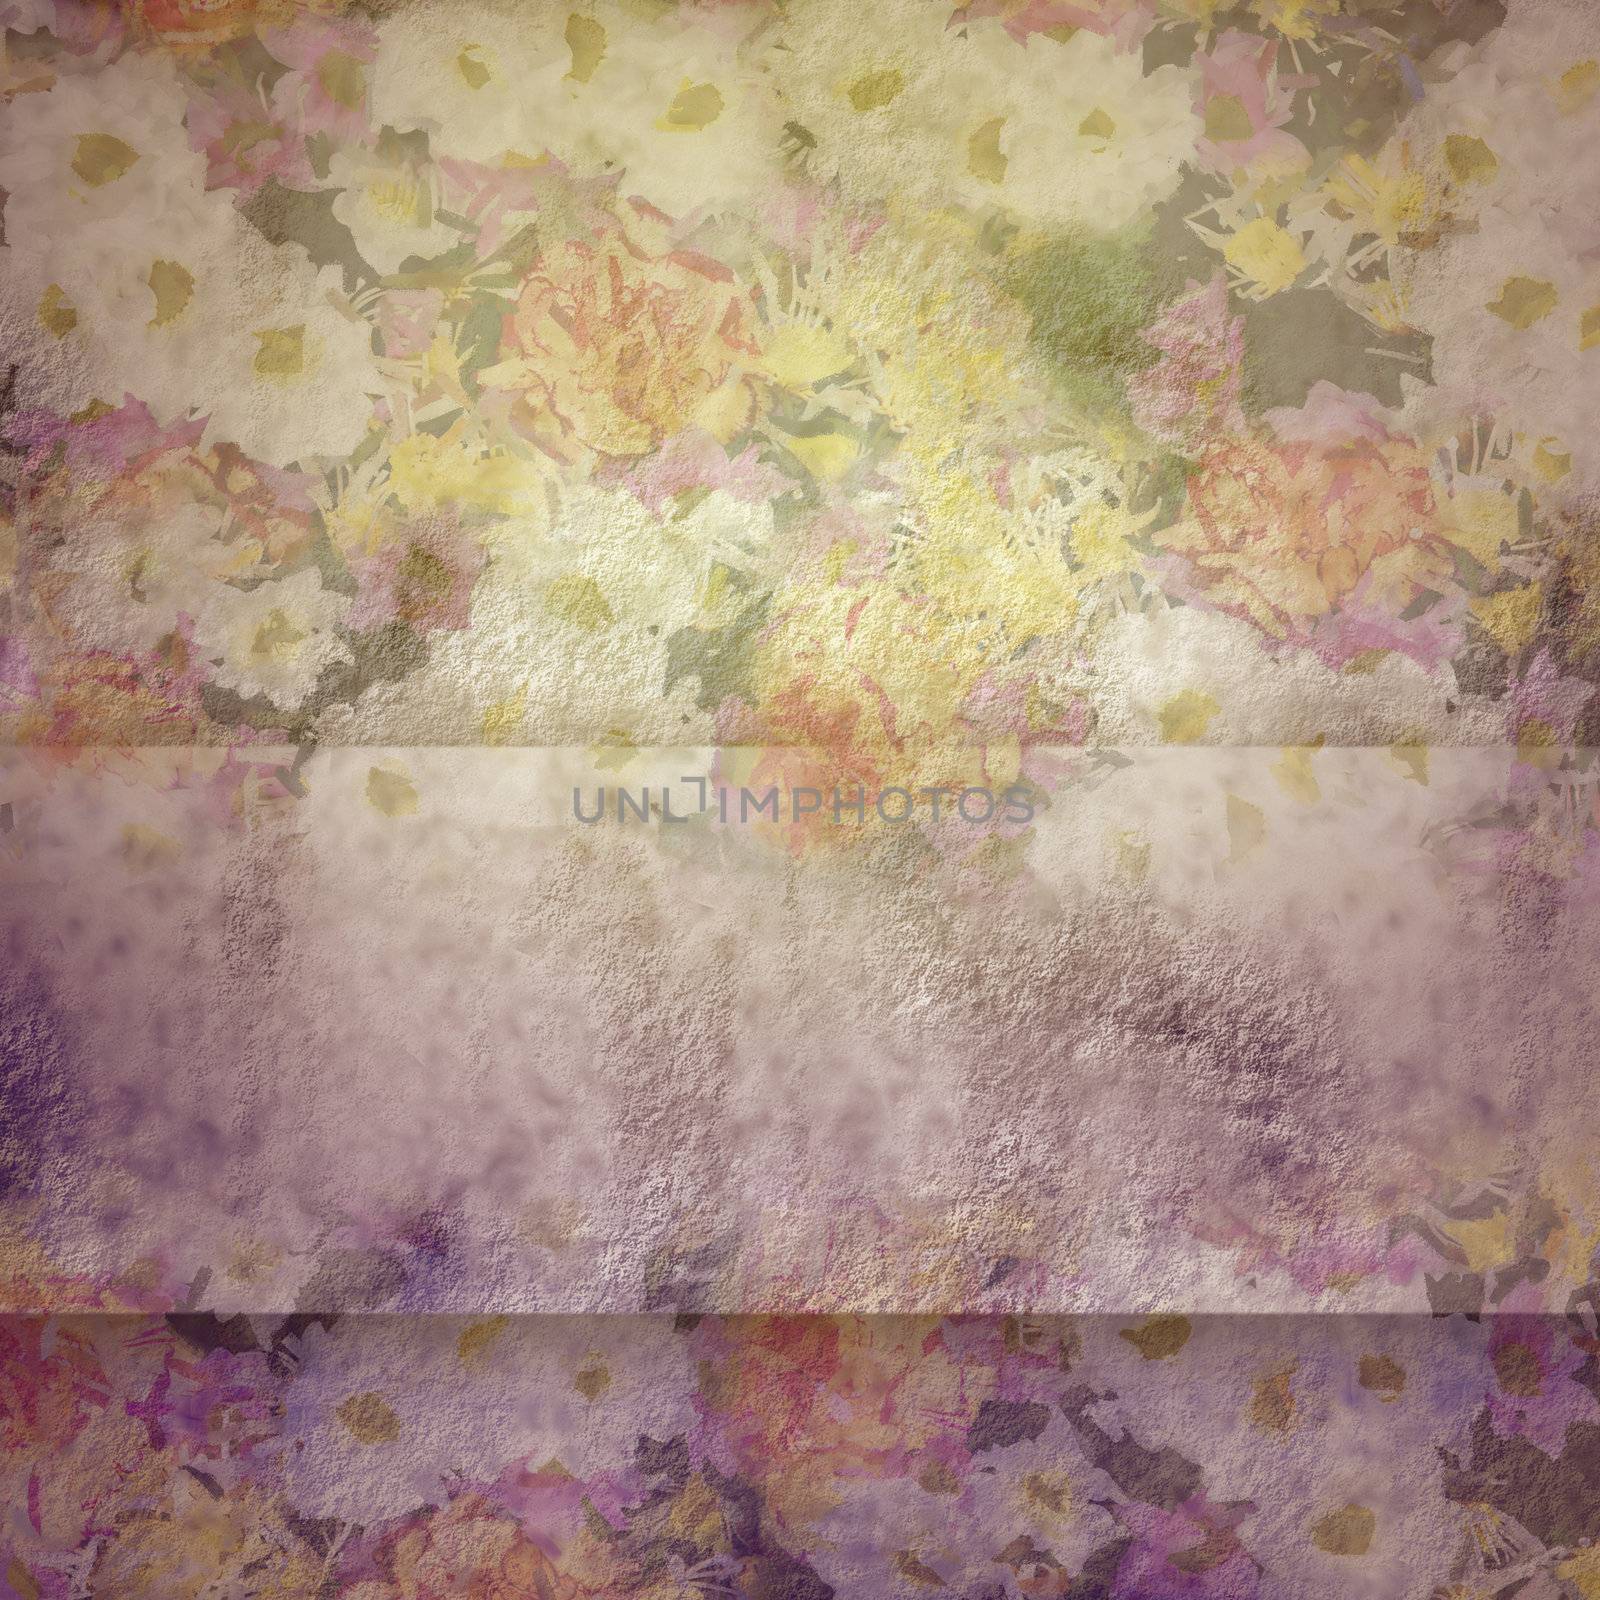  Vintage background with flowers  by Carche